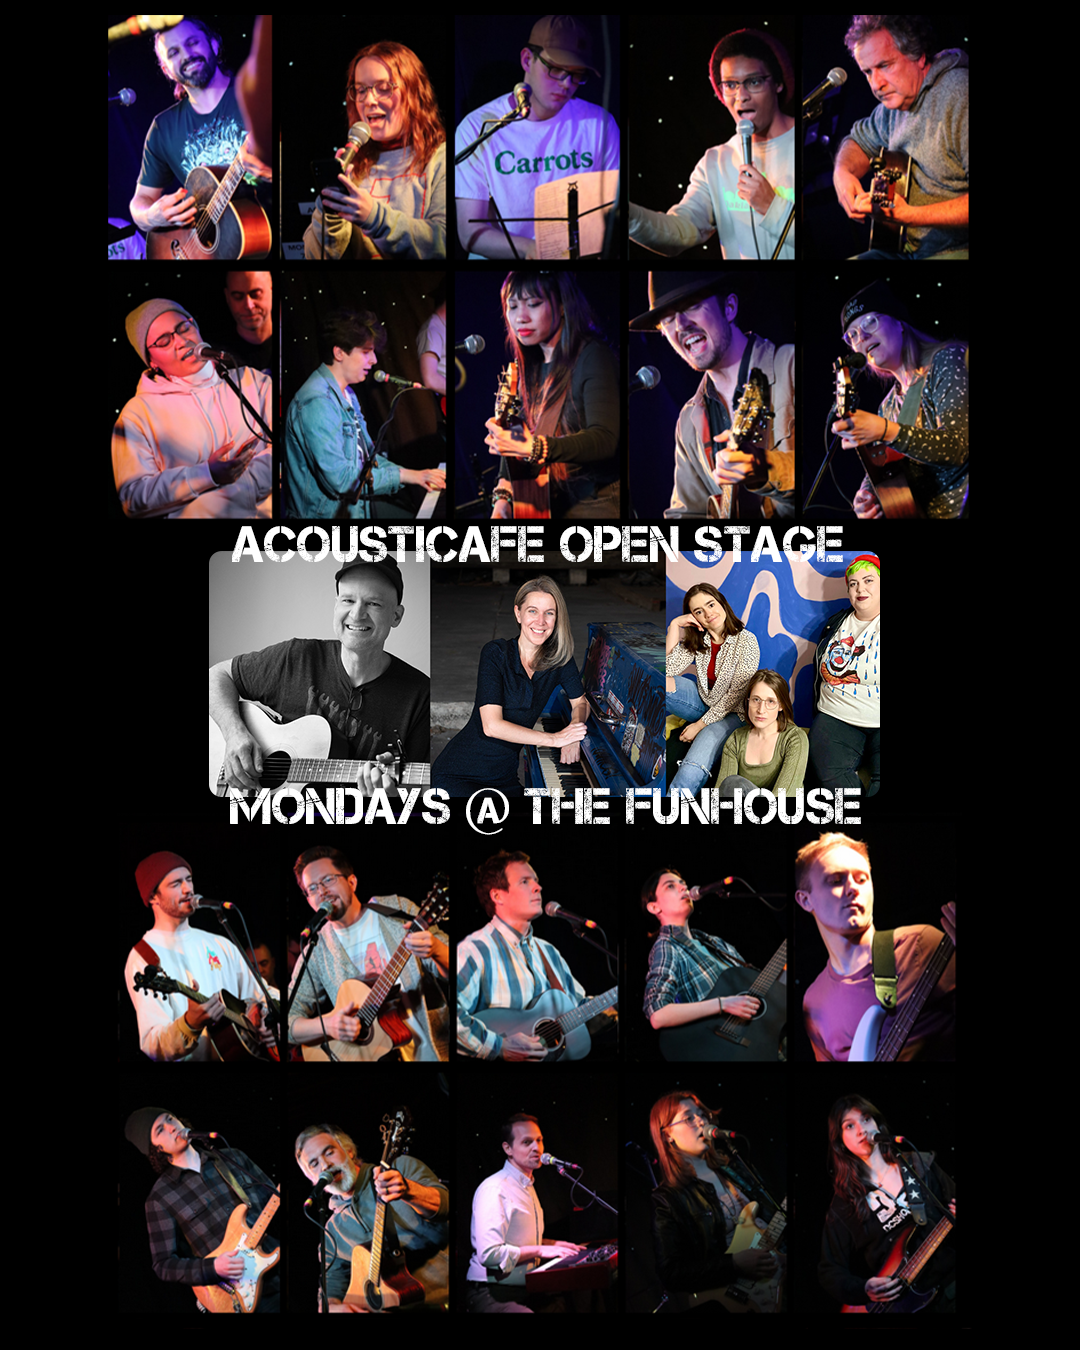 AcoustiCafe Open Stage Mondays at the Funhouse at Mr Smalls